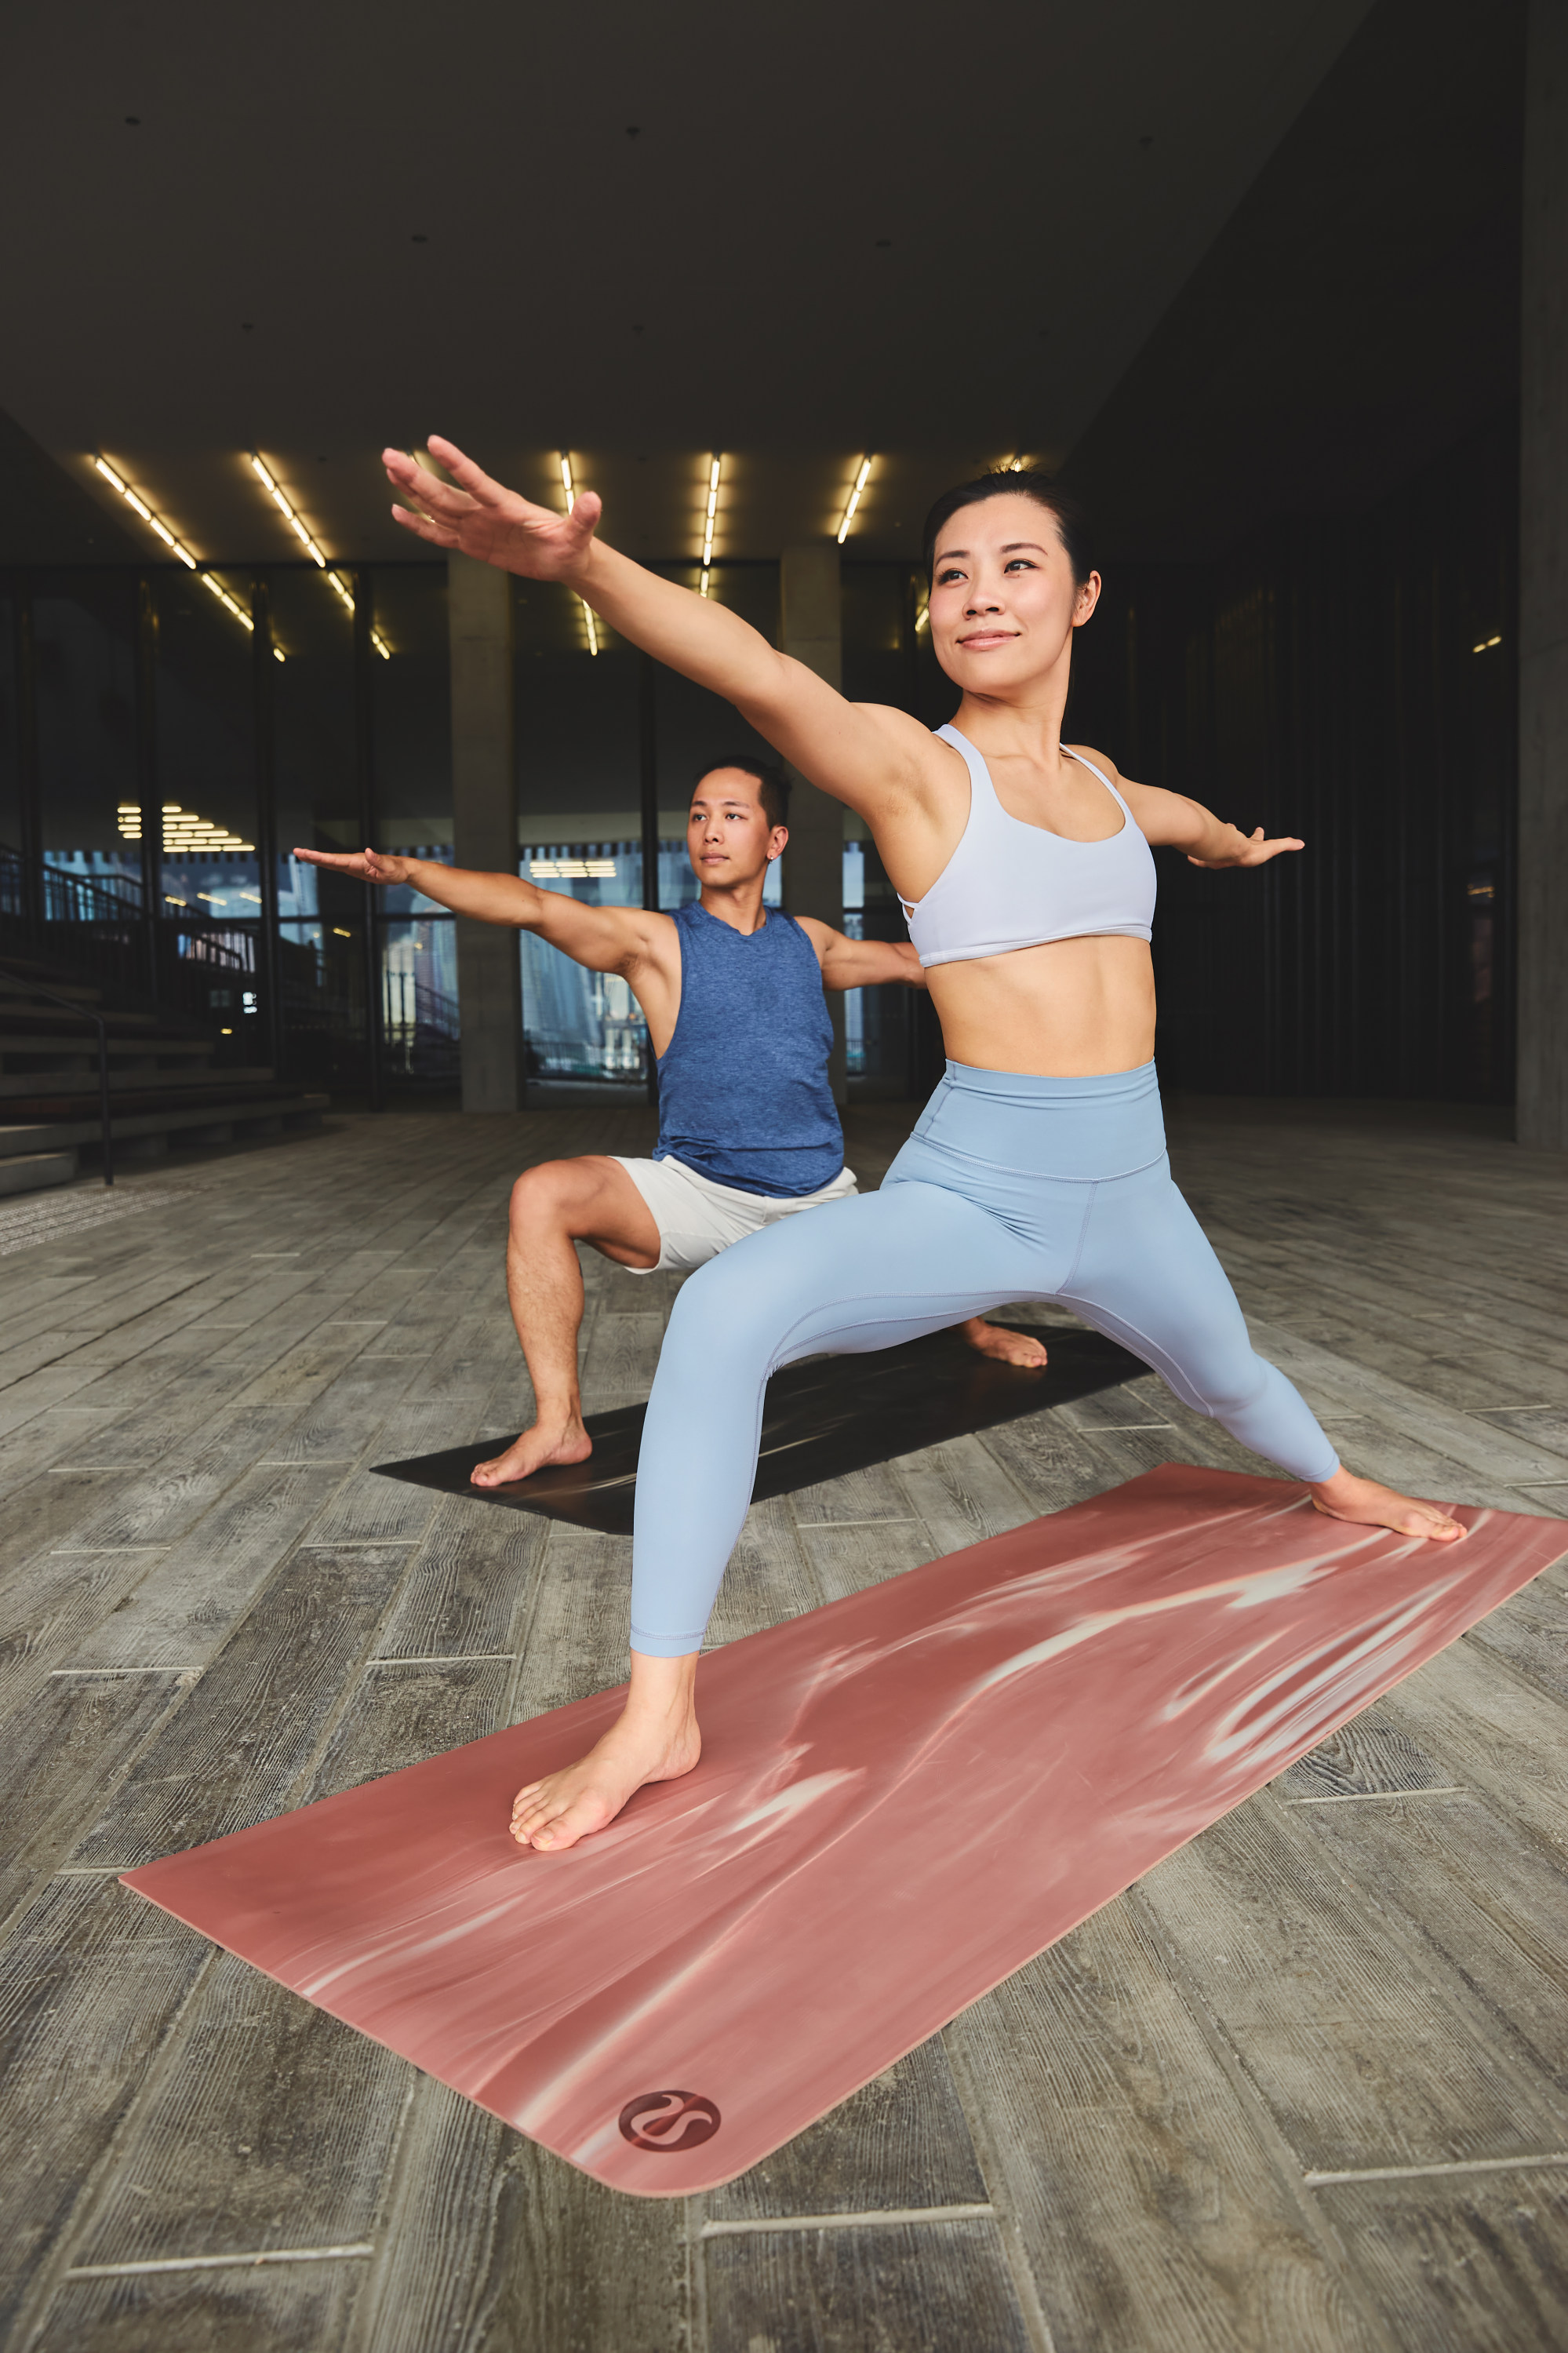 Bamboo Yoga: The Most Insta-Worthy Exercise Class in Hong Kong?